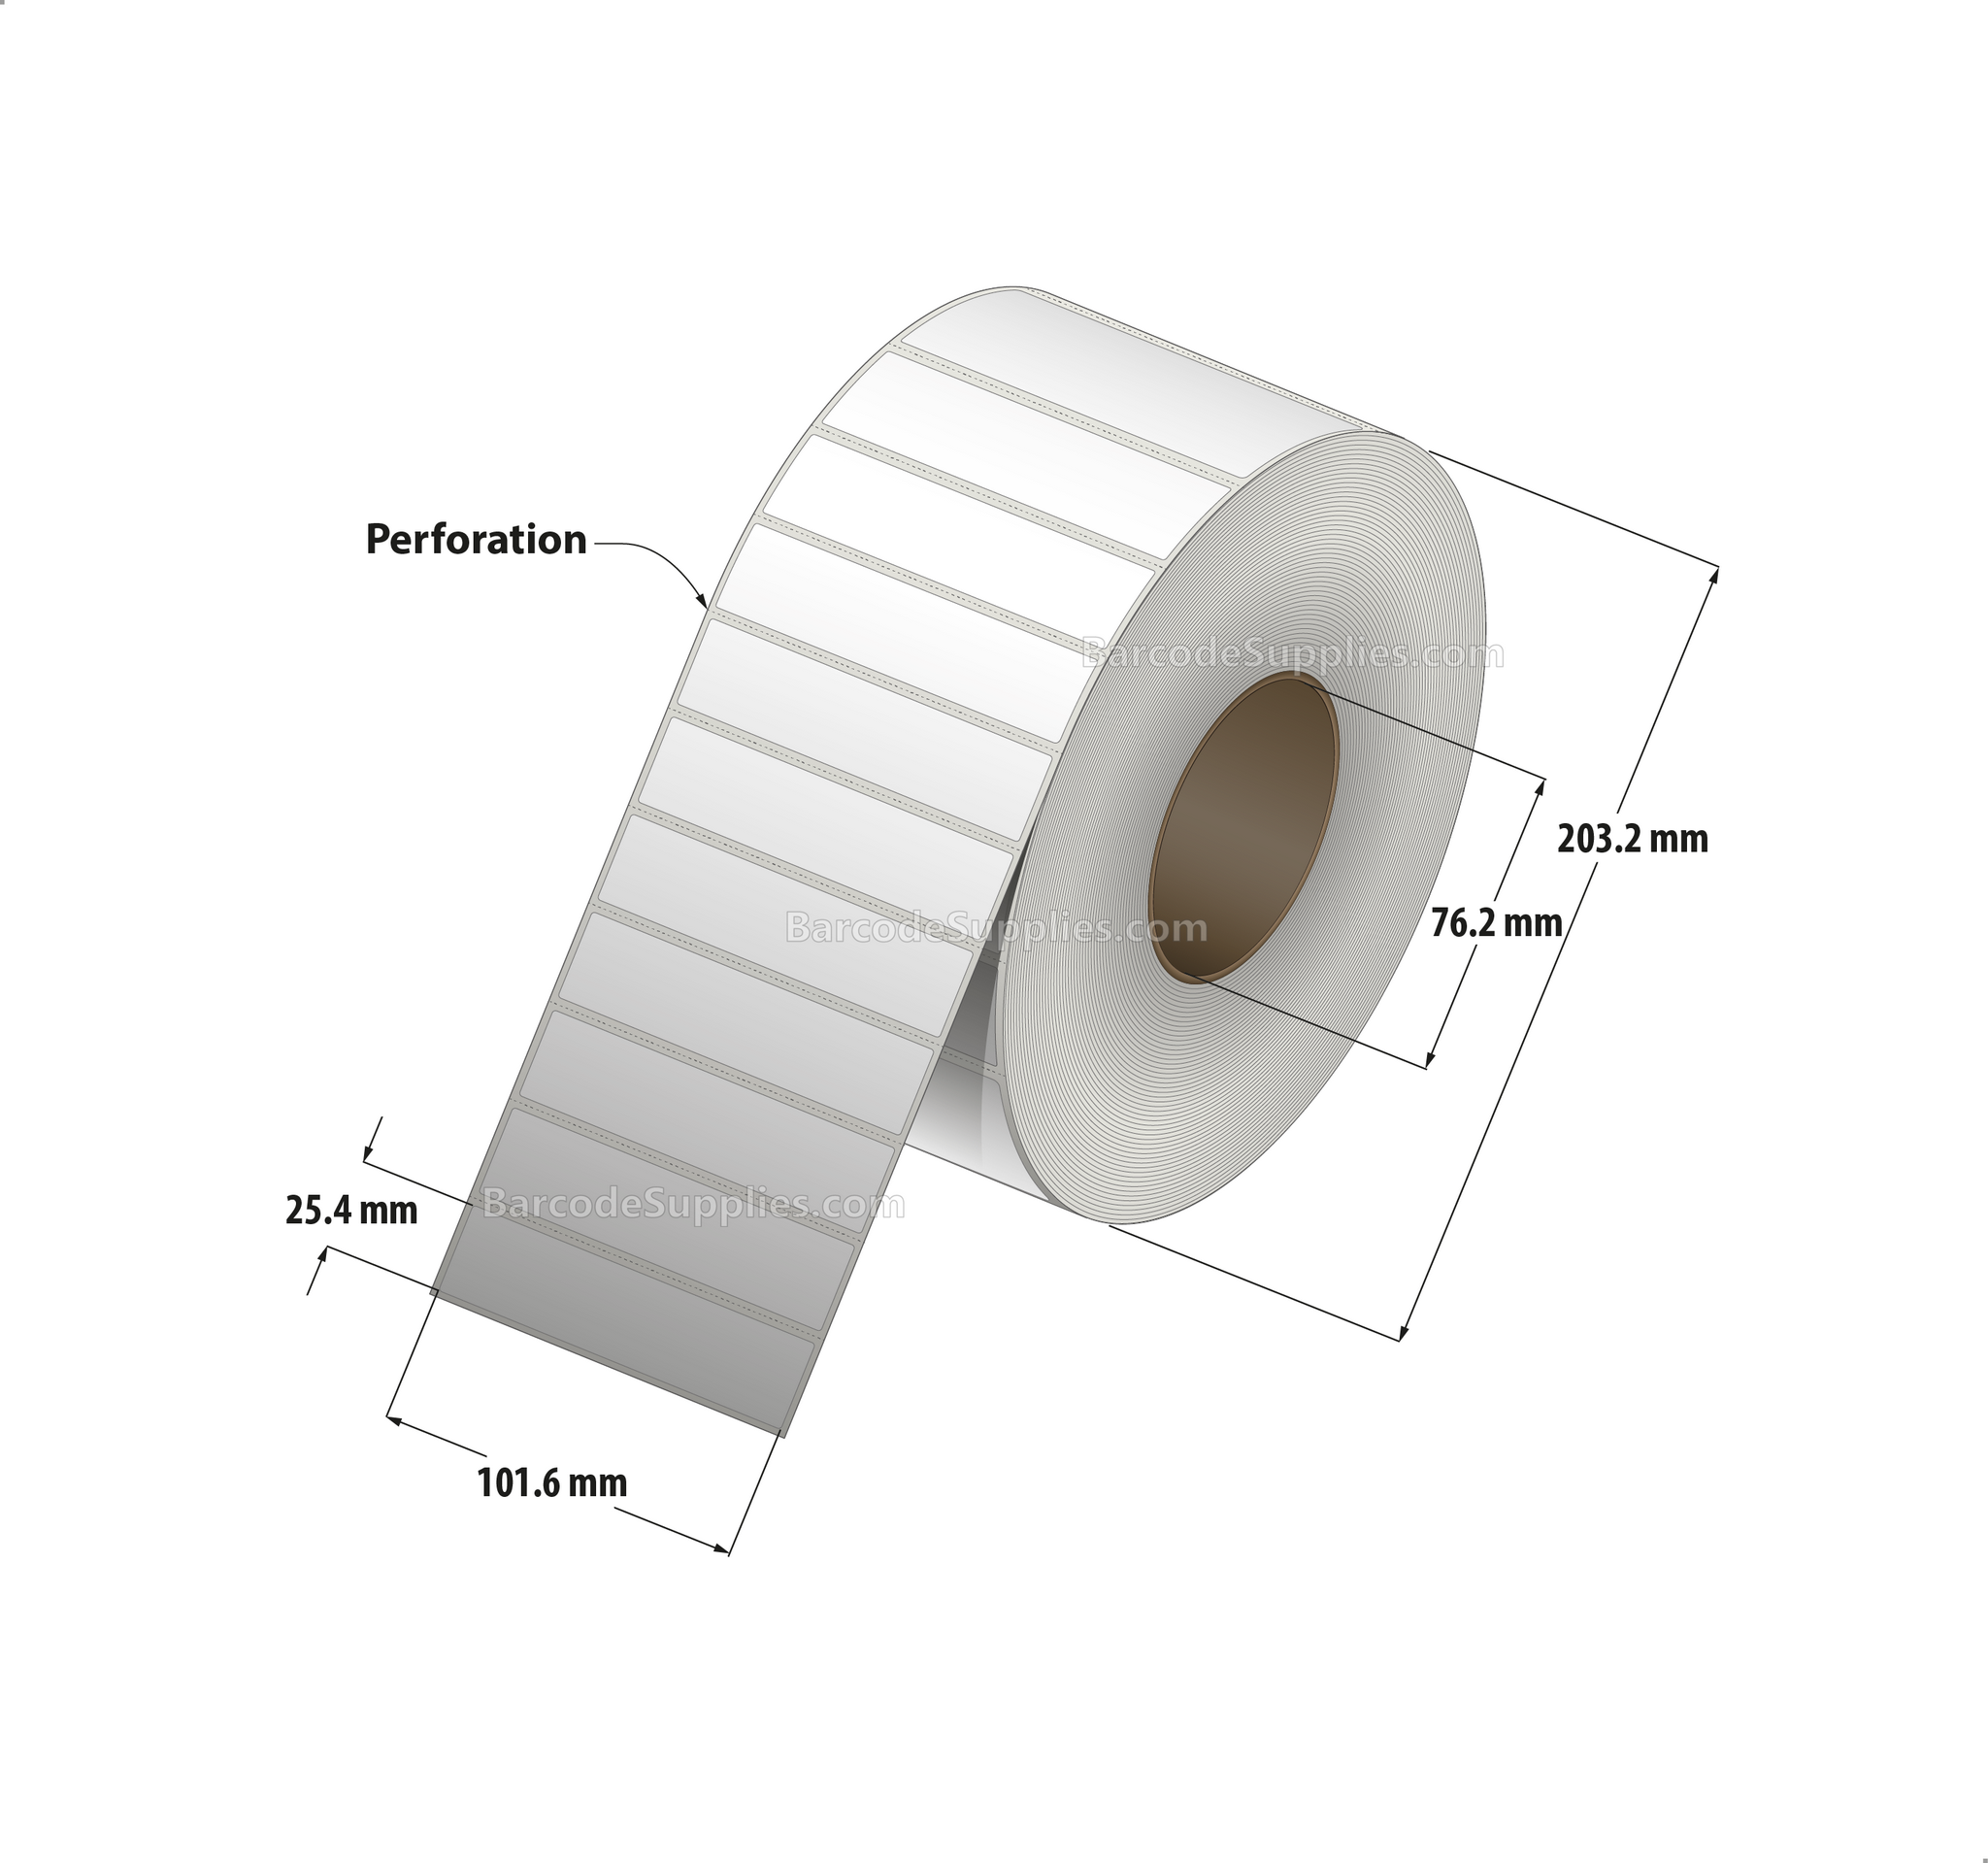 4 x 1 Direct Thermal White Labels With Acrylic Adhesive - Perforated - 5500 Labels Per Roll - Carton Of 4 Rolls - 22000 Labels Total - MPN: RDS-4-1-5500-3